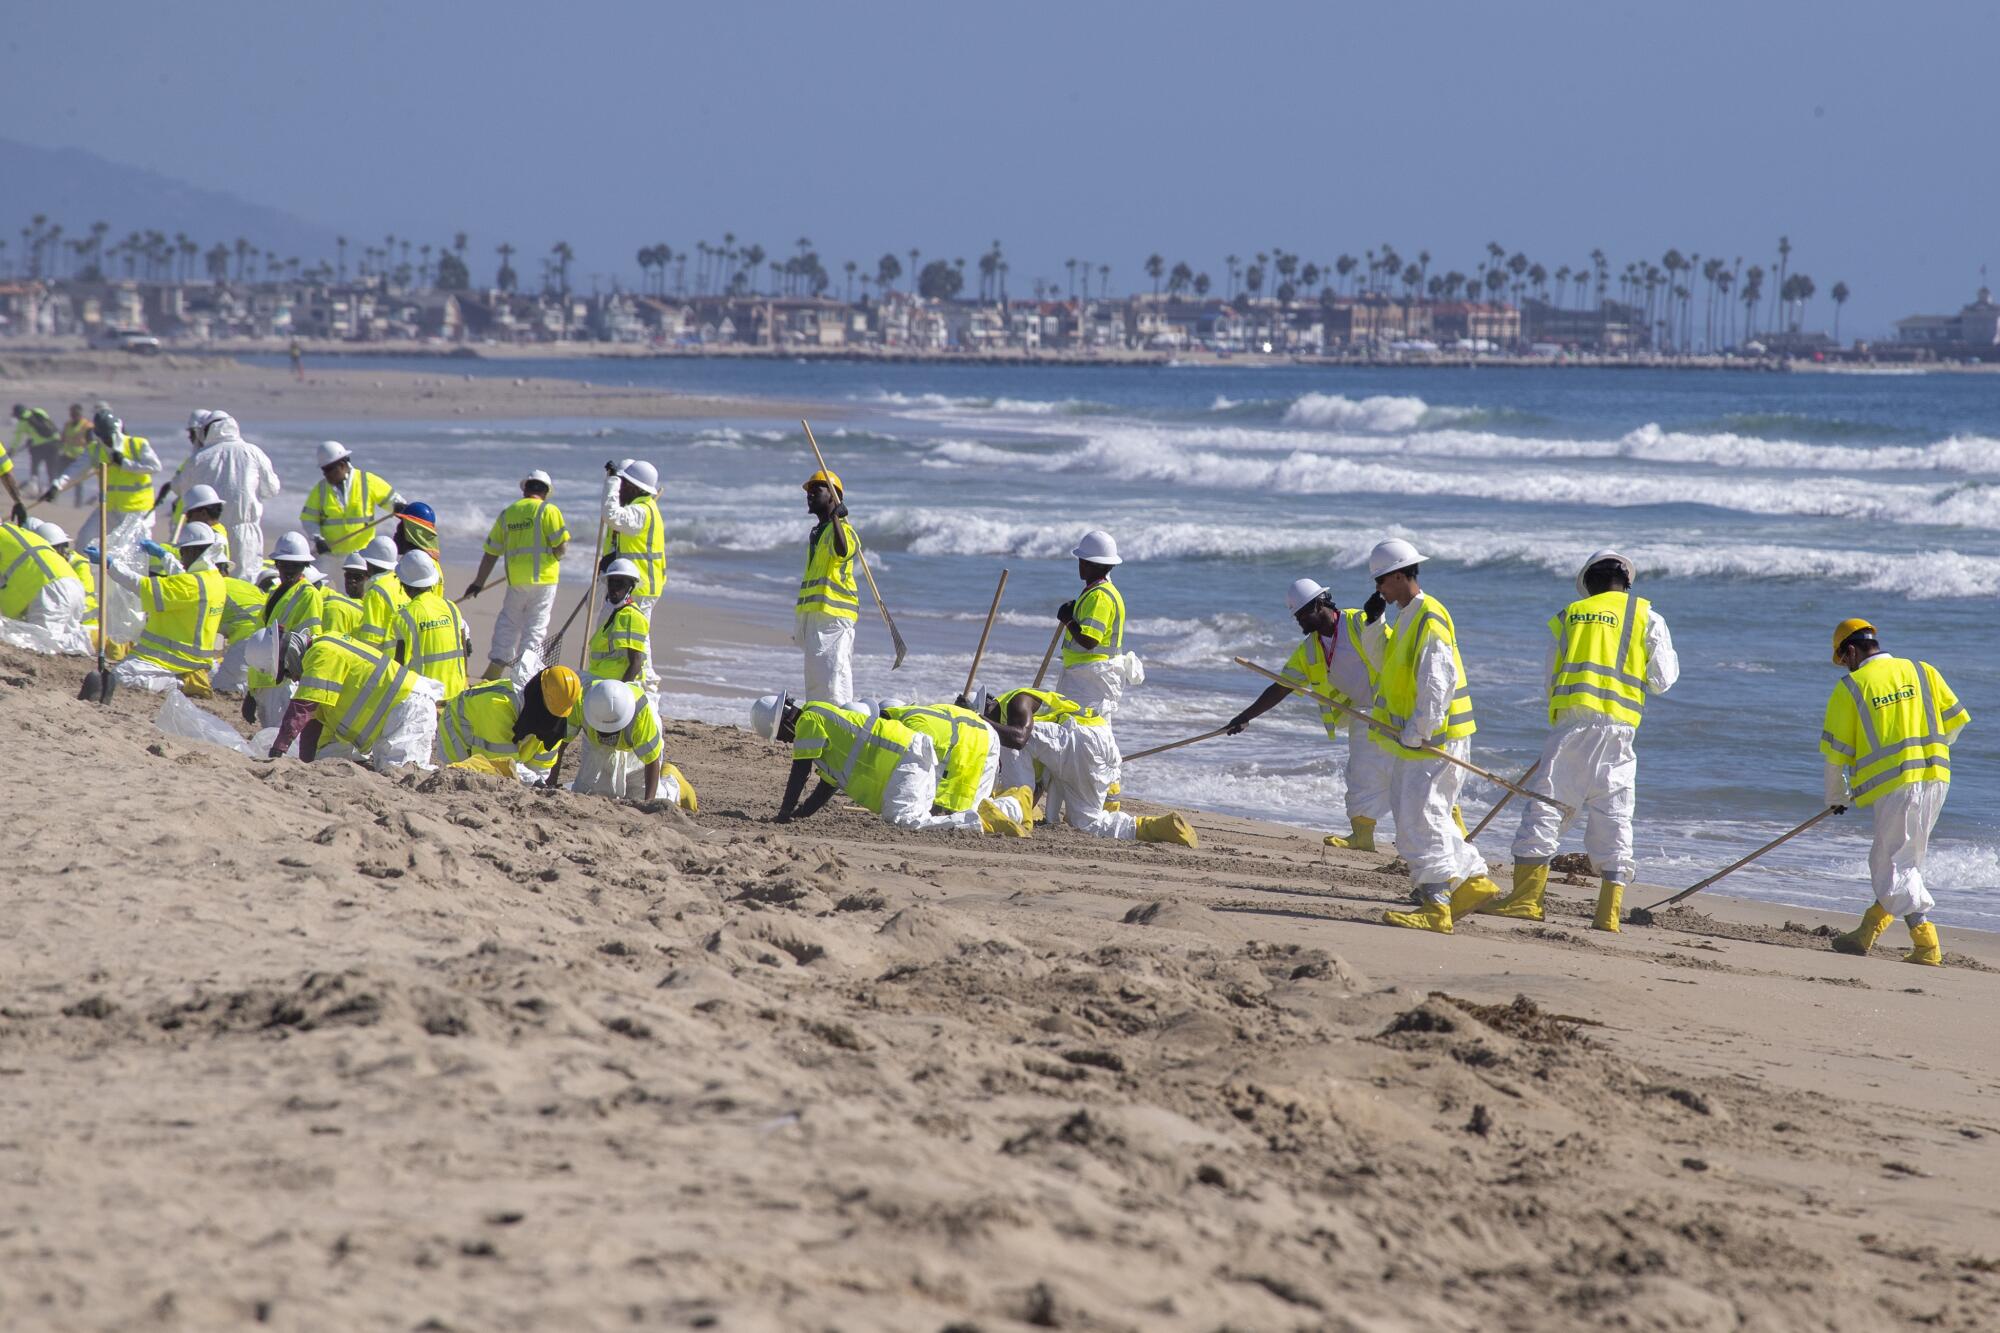 Oil spill cleanup crew members from New Jersey clean up the oil spill at Huntington State Beach on Oct. 10.